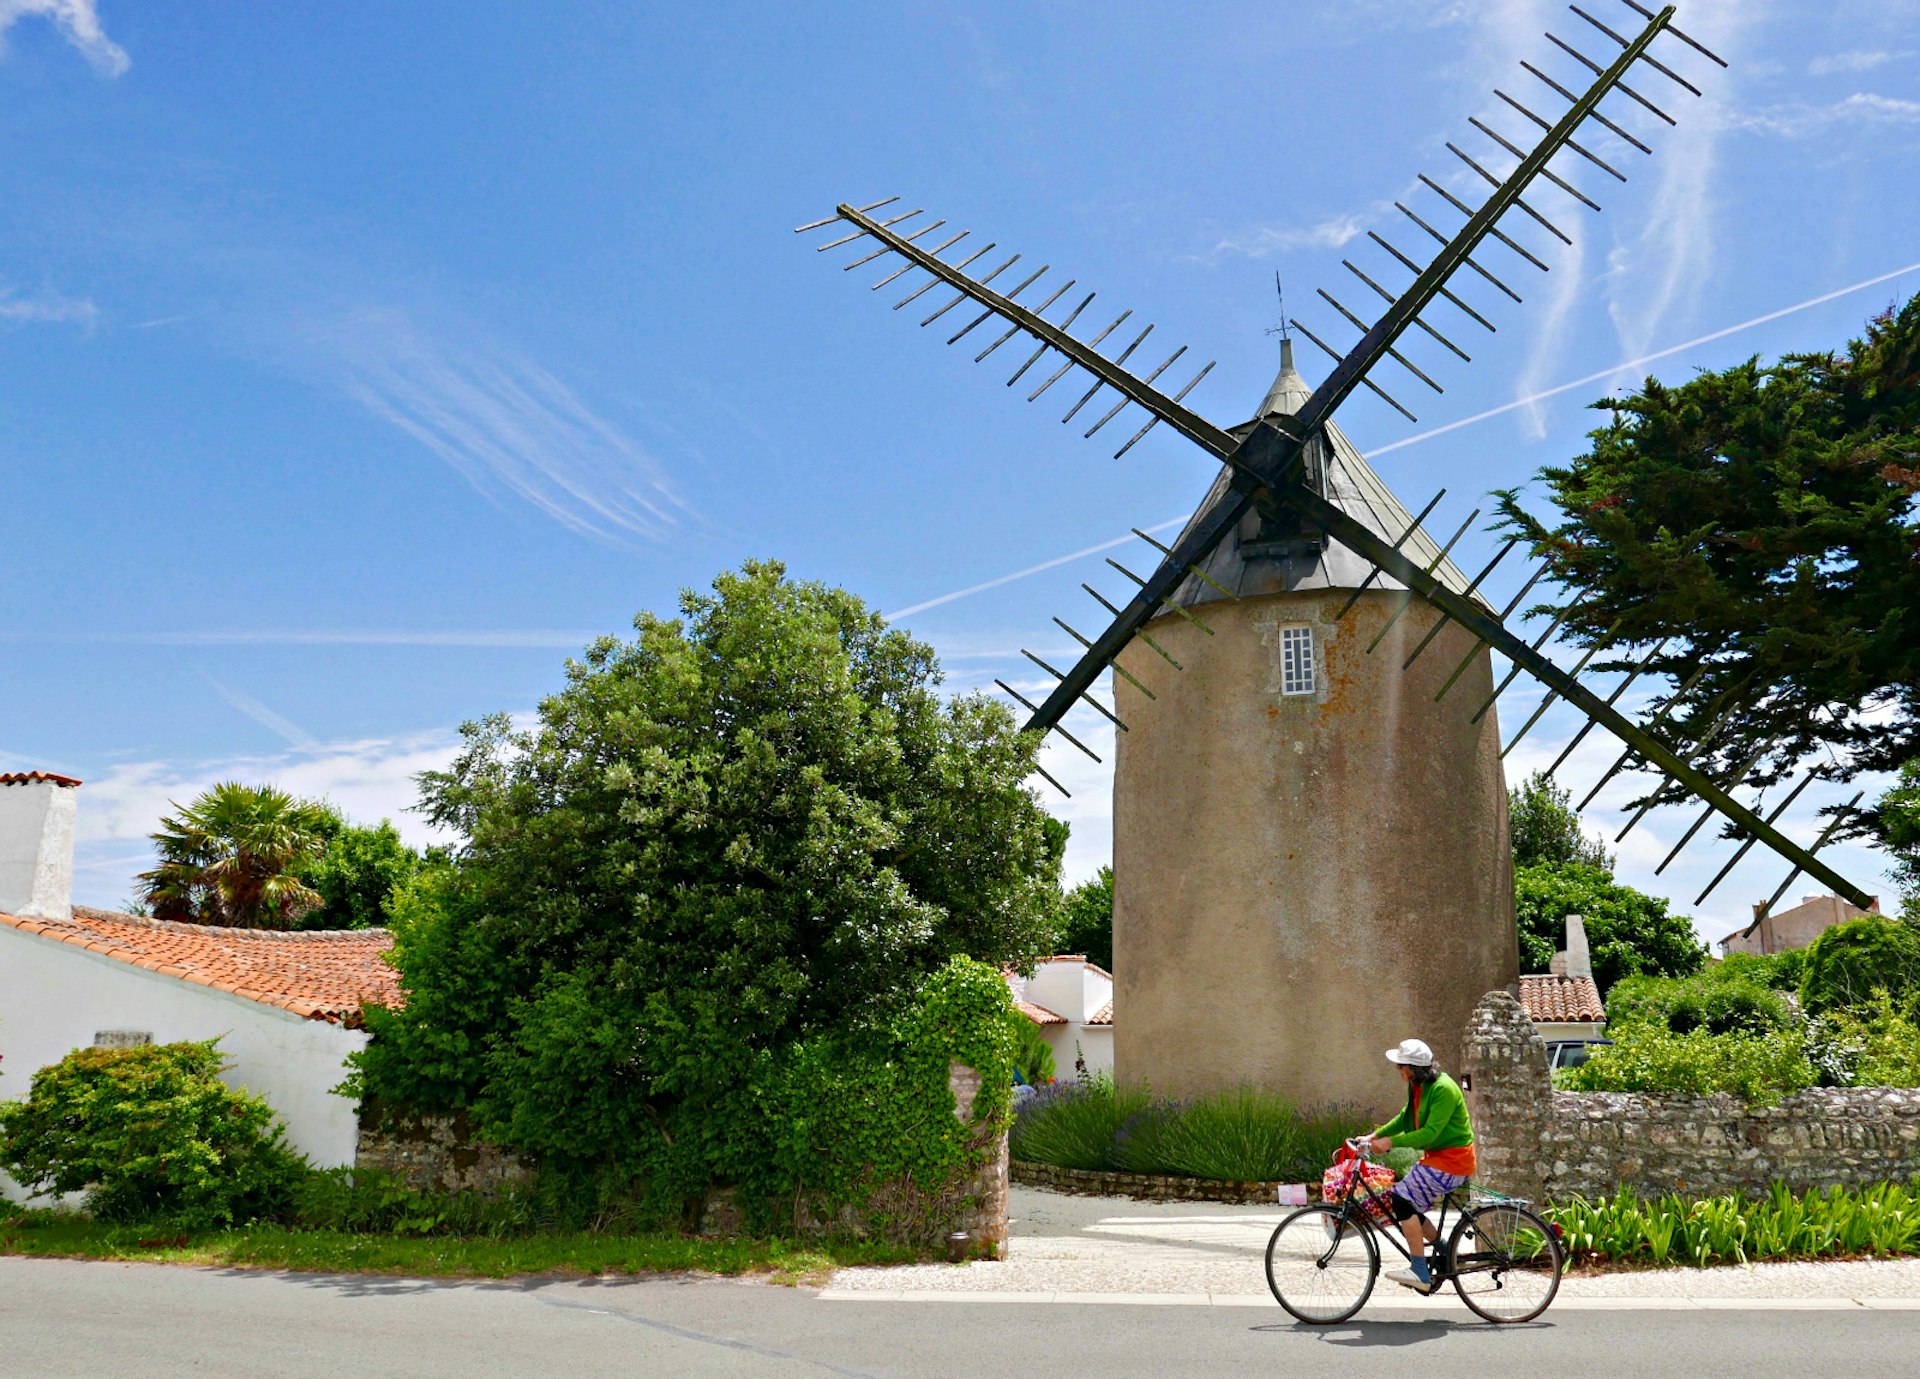 A cyclist cruises along a country lane near St-Martin-de-Ré; by the lane are a stone windmill, a low white house with a red roof, and various trees and shrubbery.